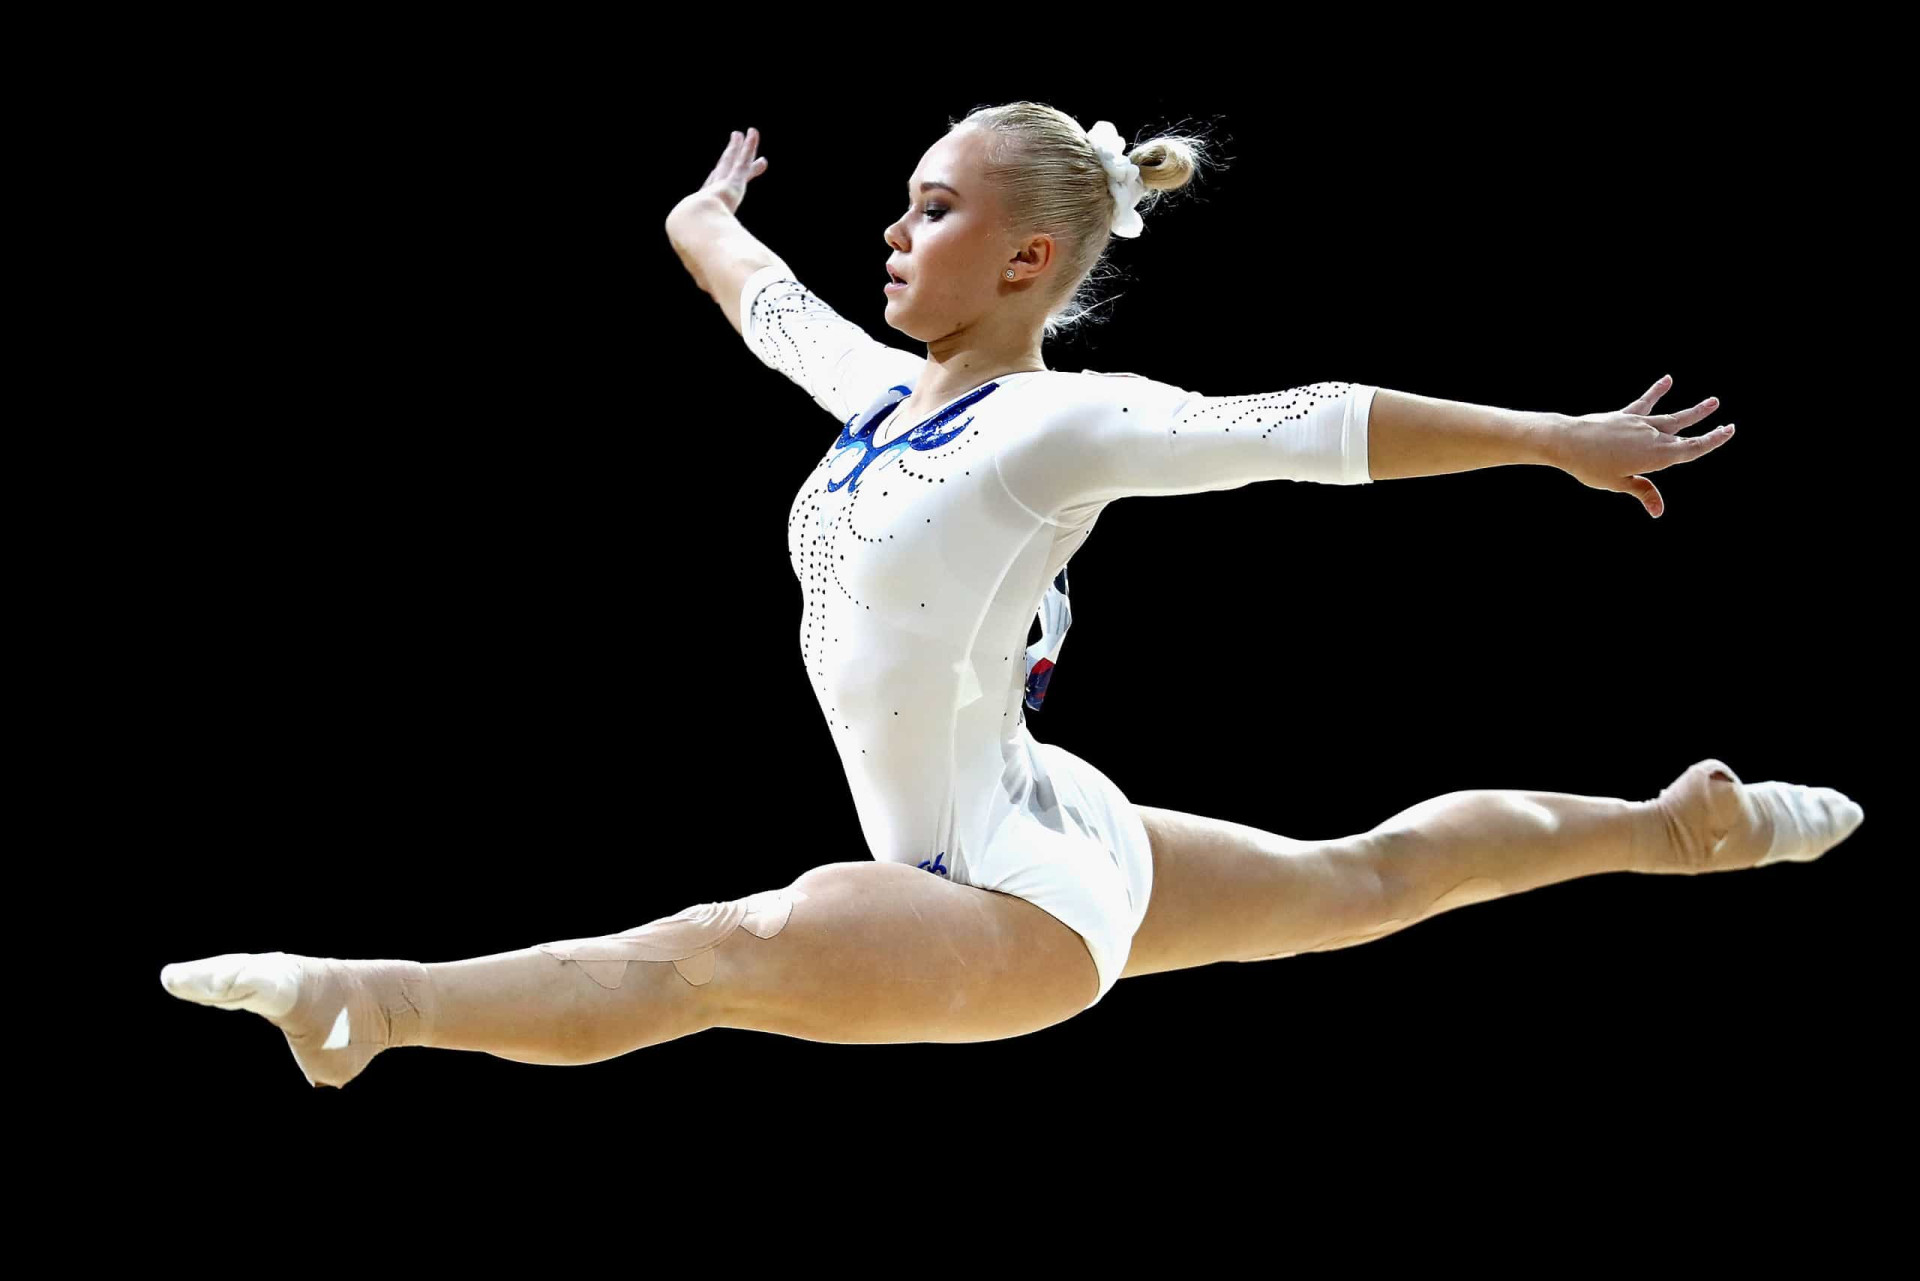 <div>In gymnastics, the floor is a specially prepared exercise surface, which is considered an apparatus. After women joined the ranks of the Olympics and first competed in gymnastics at the Games in 1928, floor exercises were eventually added to routines in 1932.</div><p><a href="https://www.msn.com/en-ph/community/channel/vid-7xx8mnucu55yw63we9va2gwr7uihbxwc68fxqp25x6tg4ftibpra?cvid=94631541bc0f4f89bfd59158d696ad7e">Follow us and access great exclusive content every day</a></p>